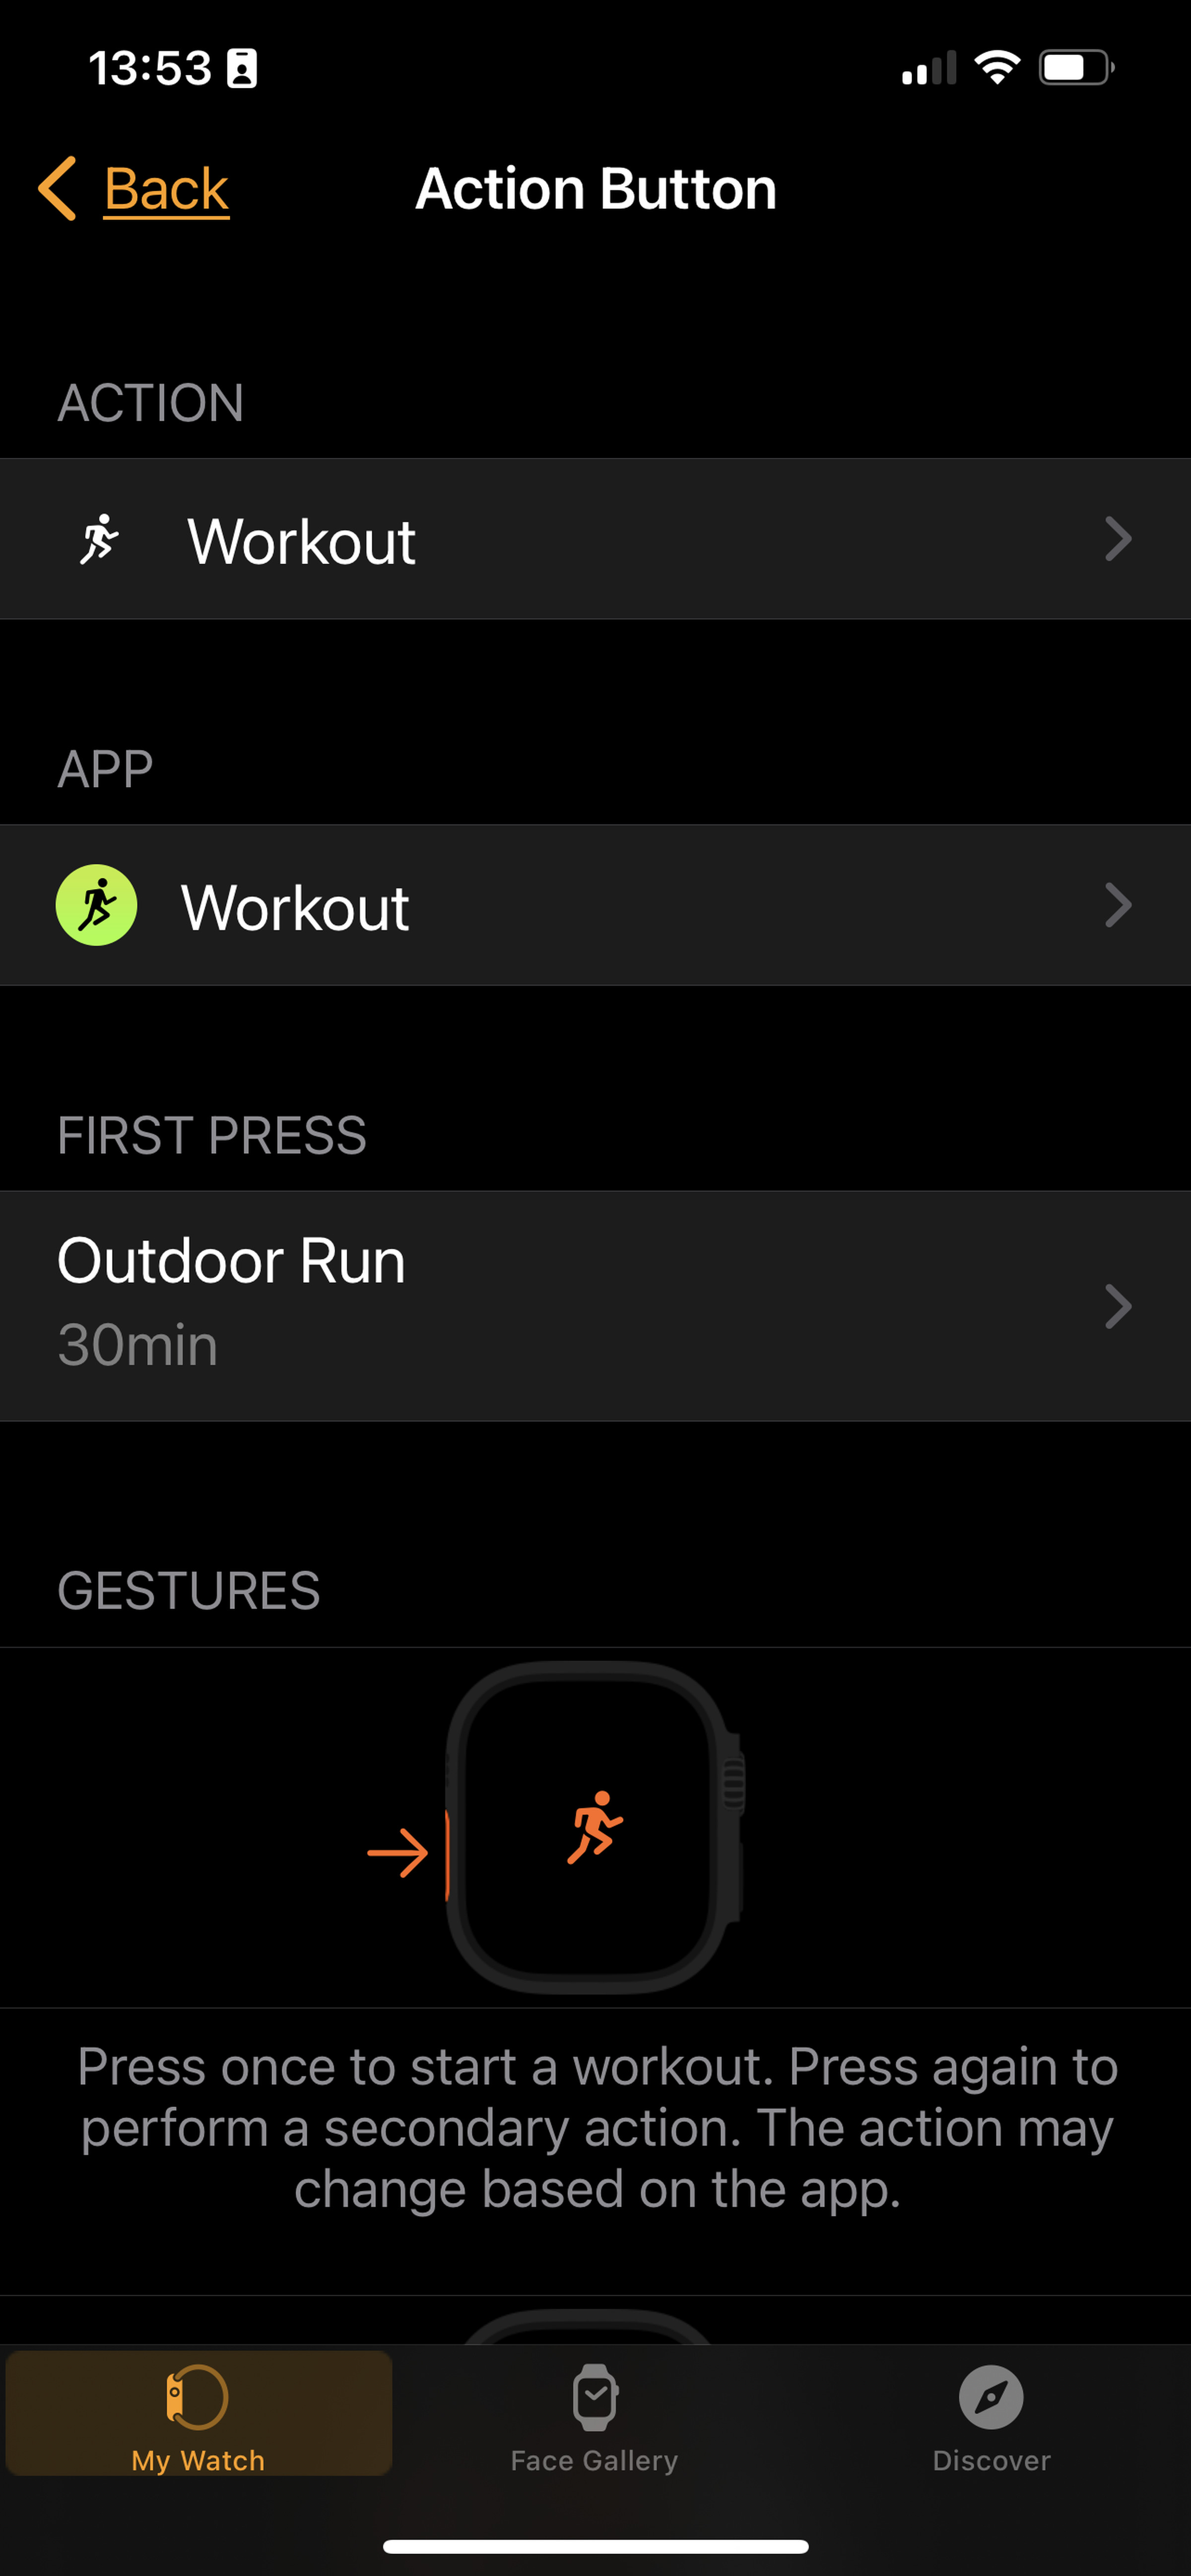 Screenshot of top half of Action button menu for the Workout action showing Action, App, First Press and Gestures